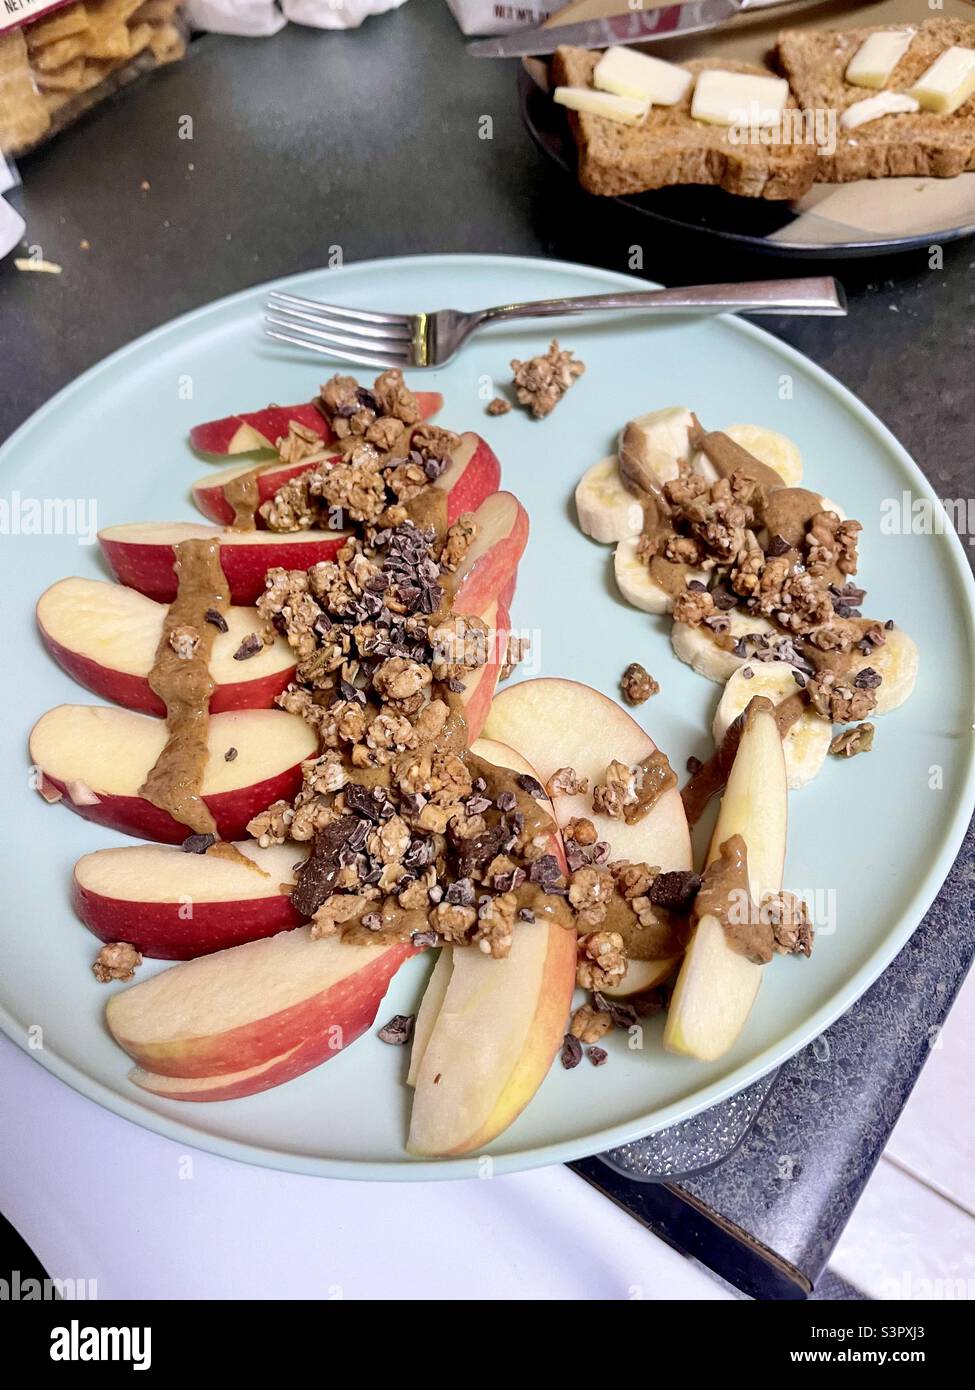 Sliced apple with almond butter drizzle topped with oats and chocolate nuggets on plate with a fork, toast and butter in background Stock Photo